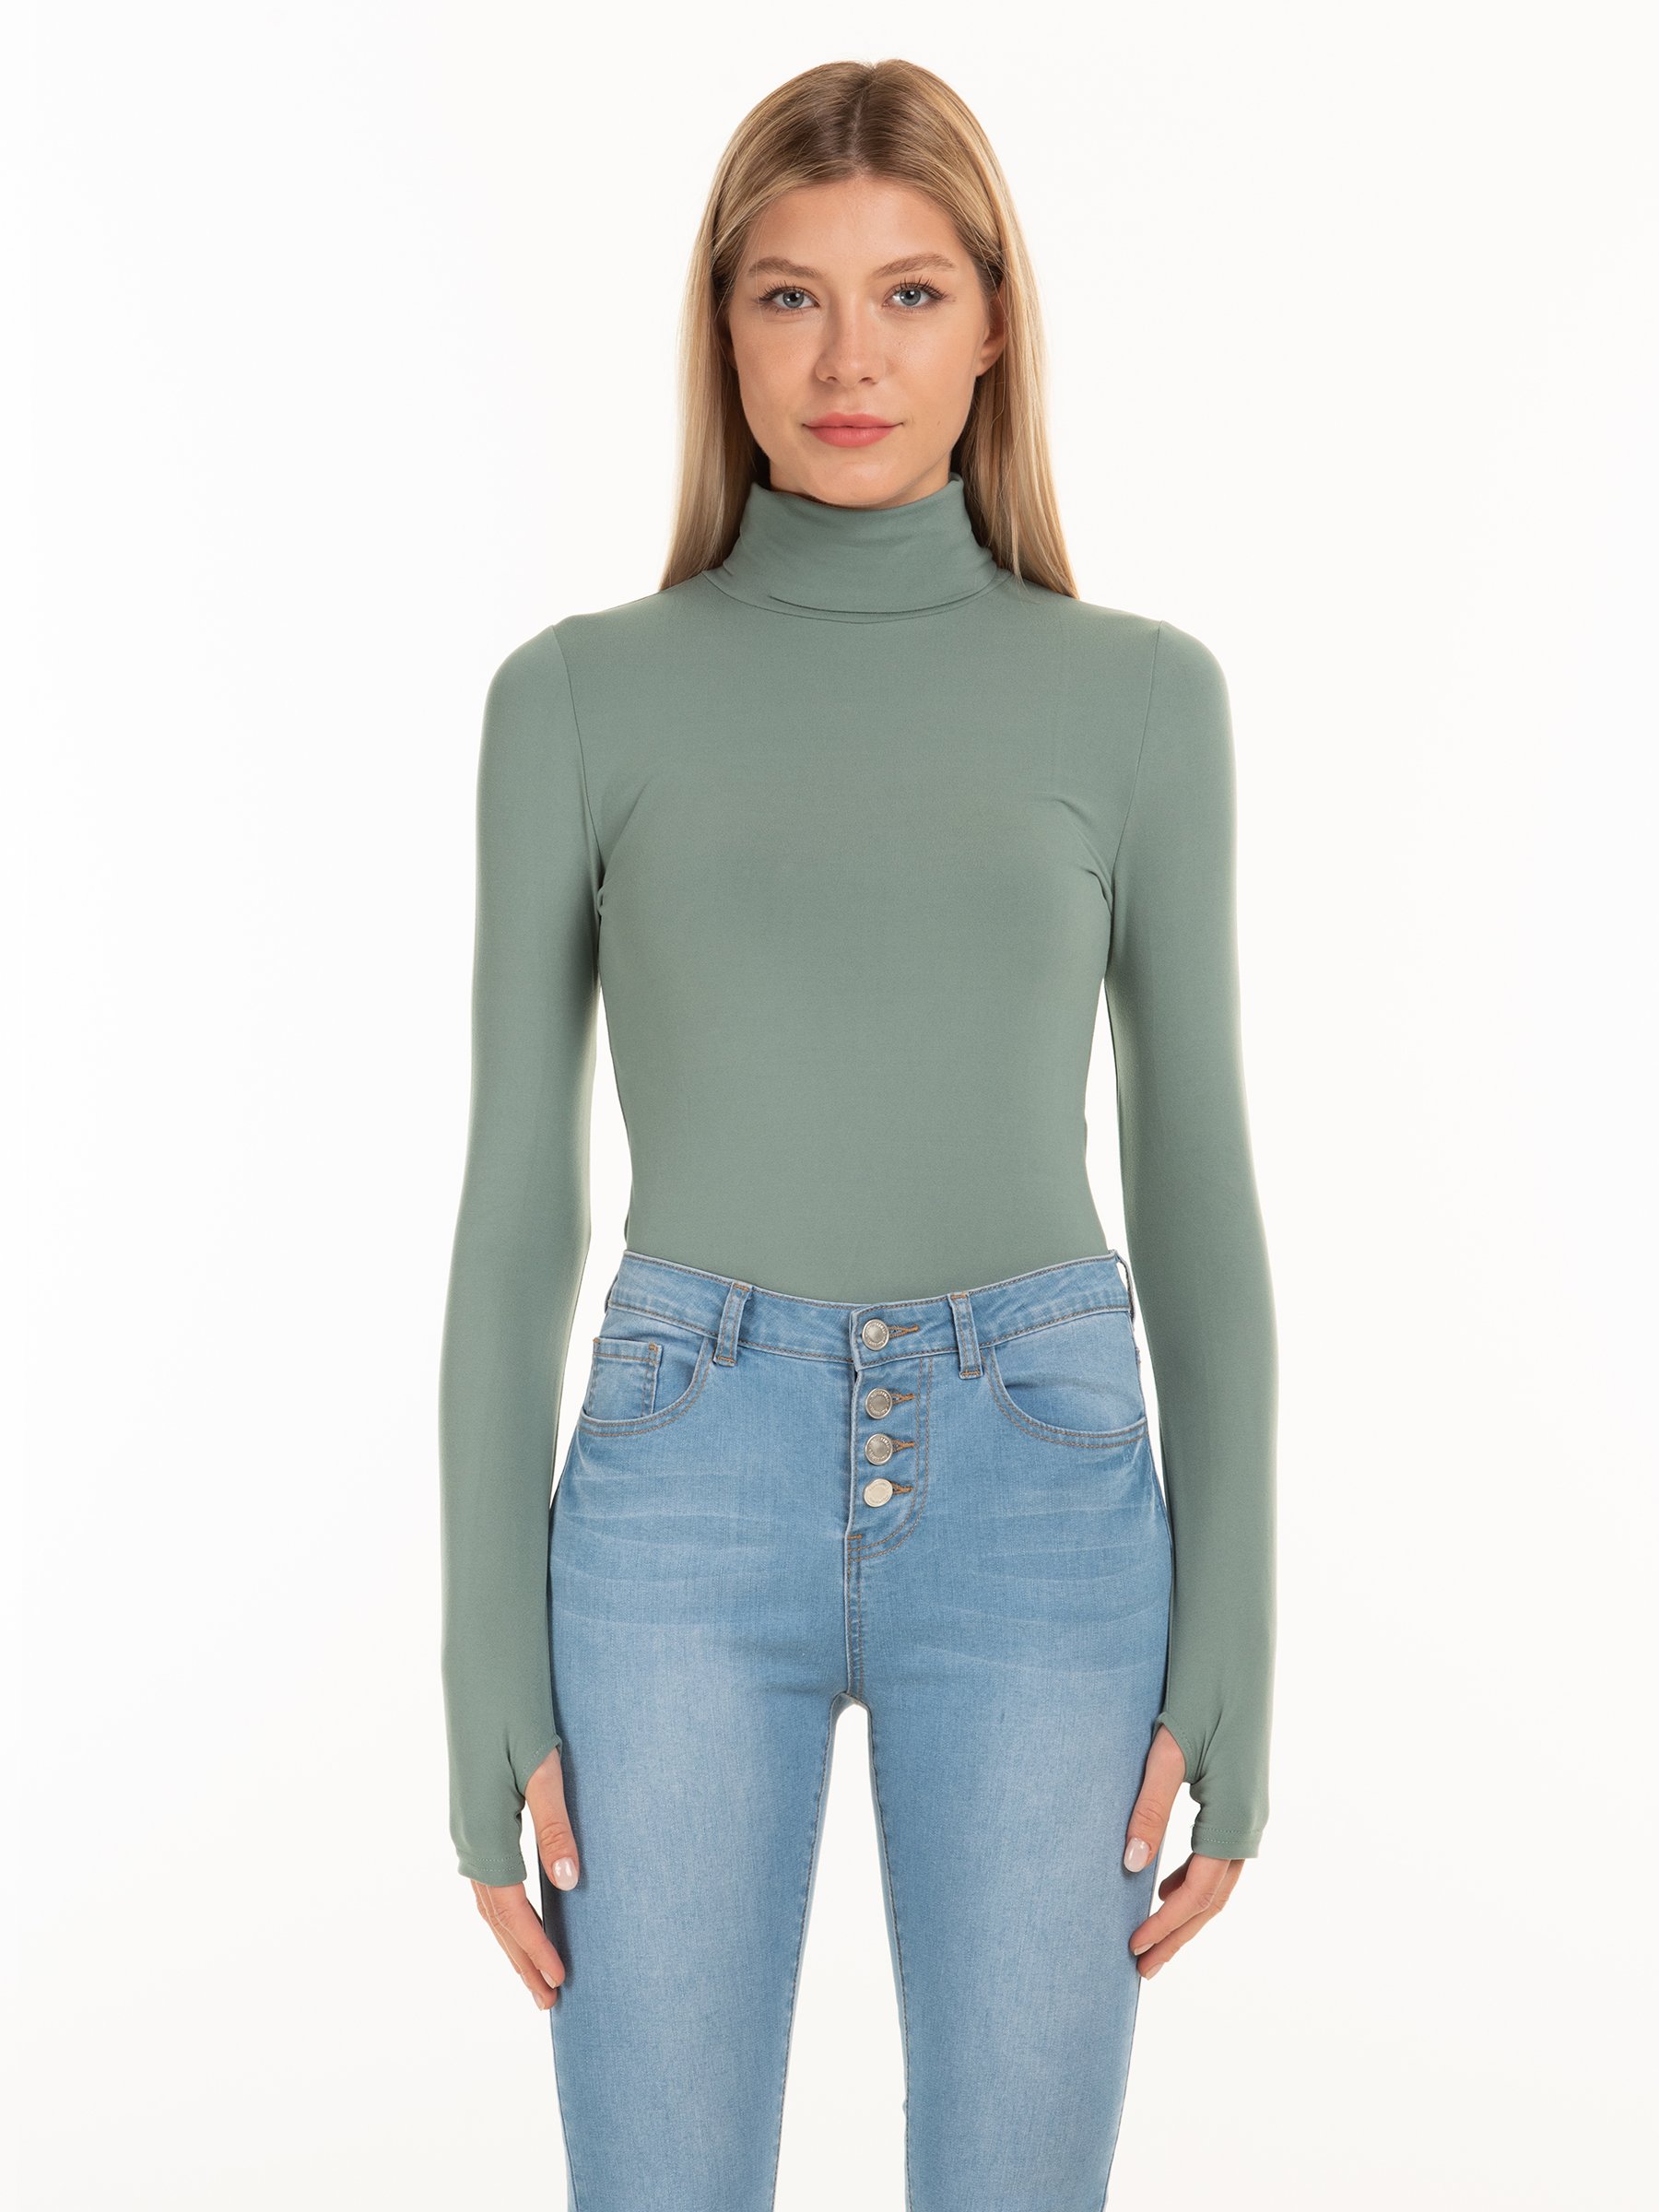 High collar long sleeve bodysuit with thumb hole detail